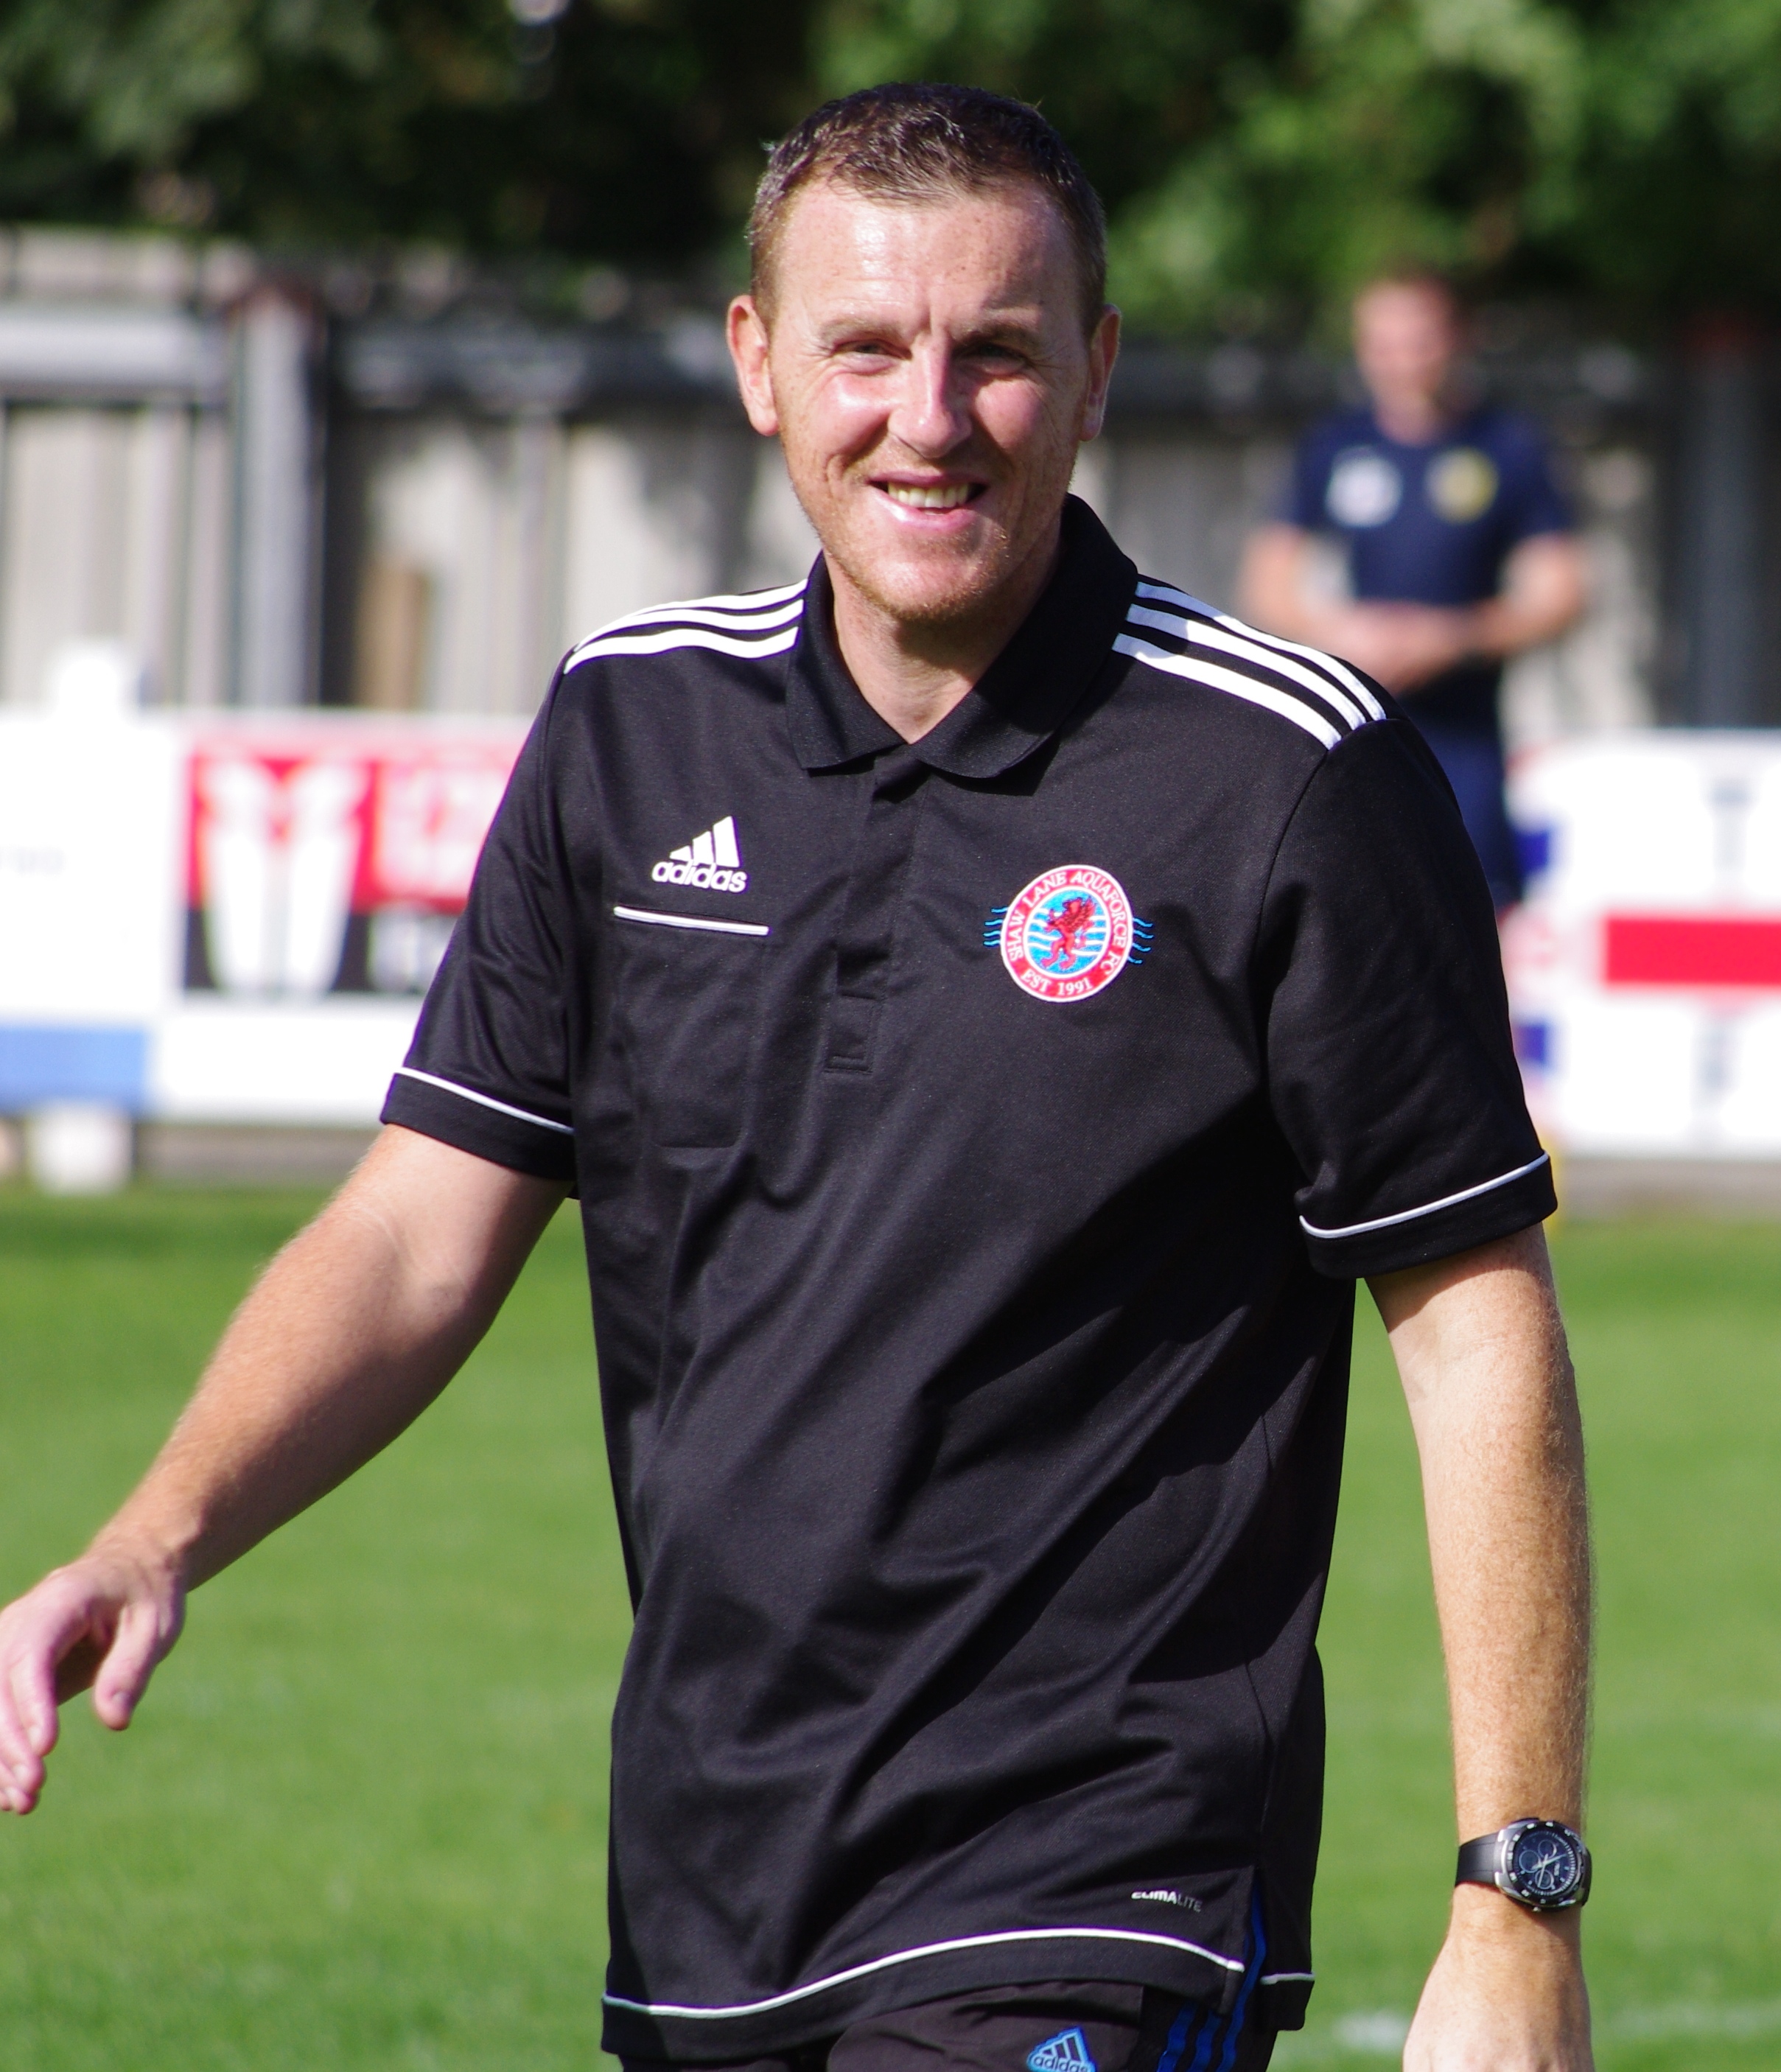 Shaw Lane Aquaforce manager Craig Elliott is pleased with his side's  goal-filled return to action